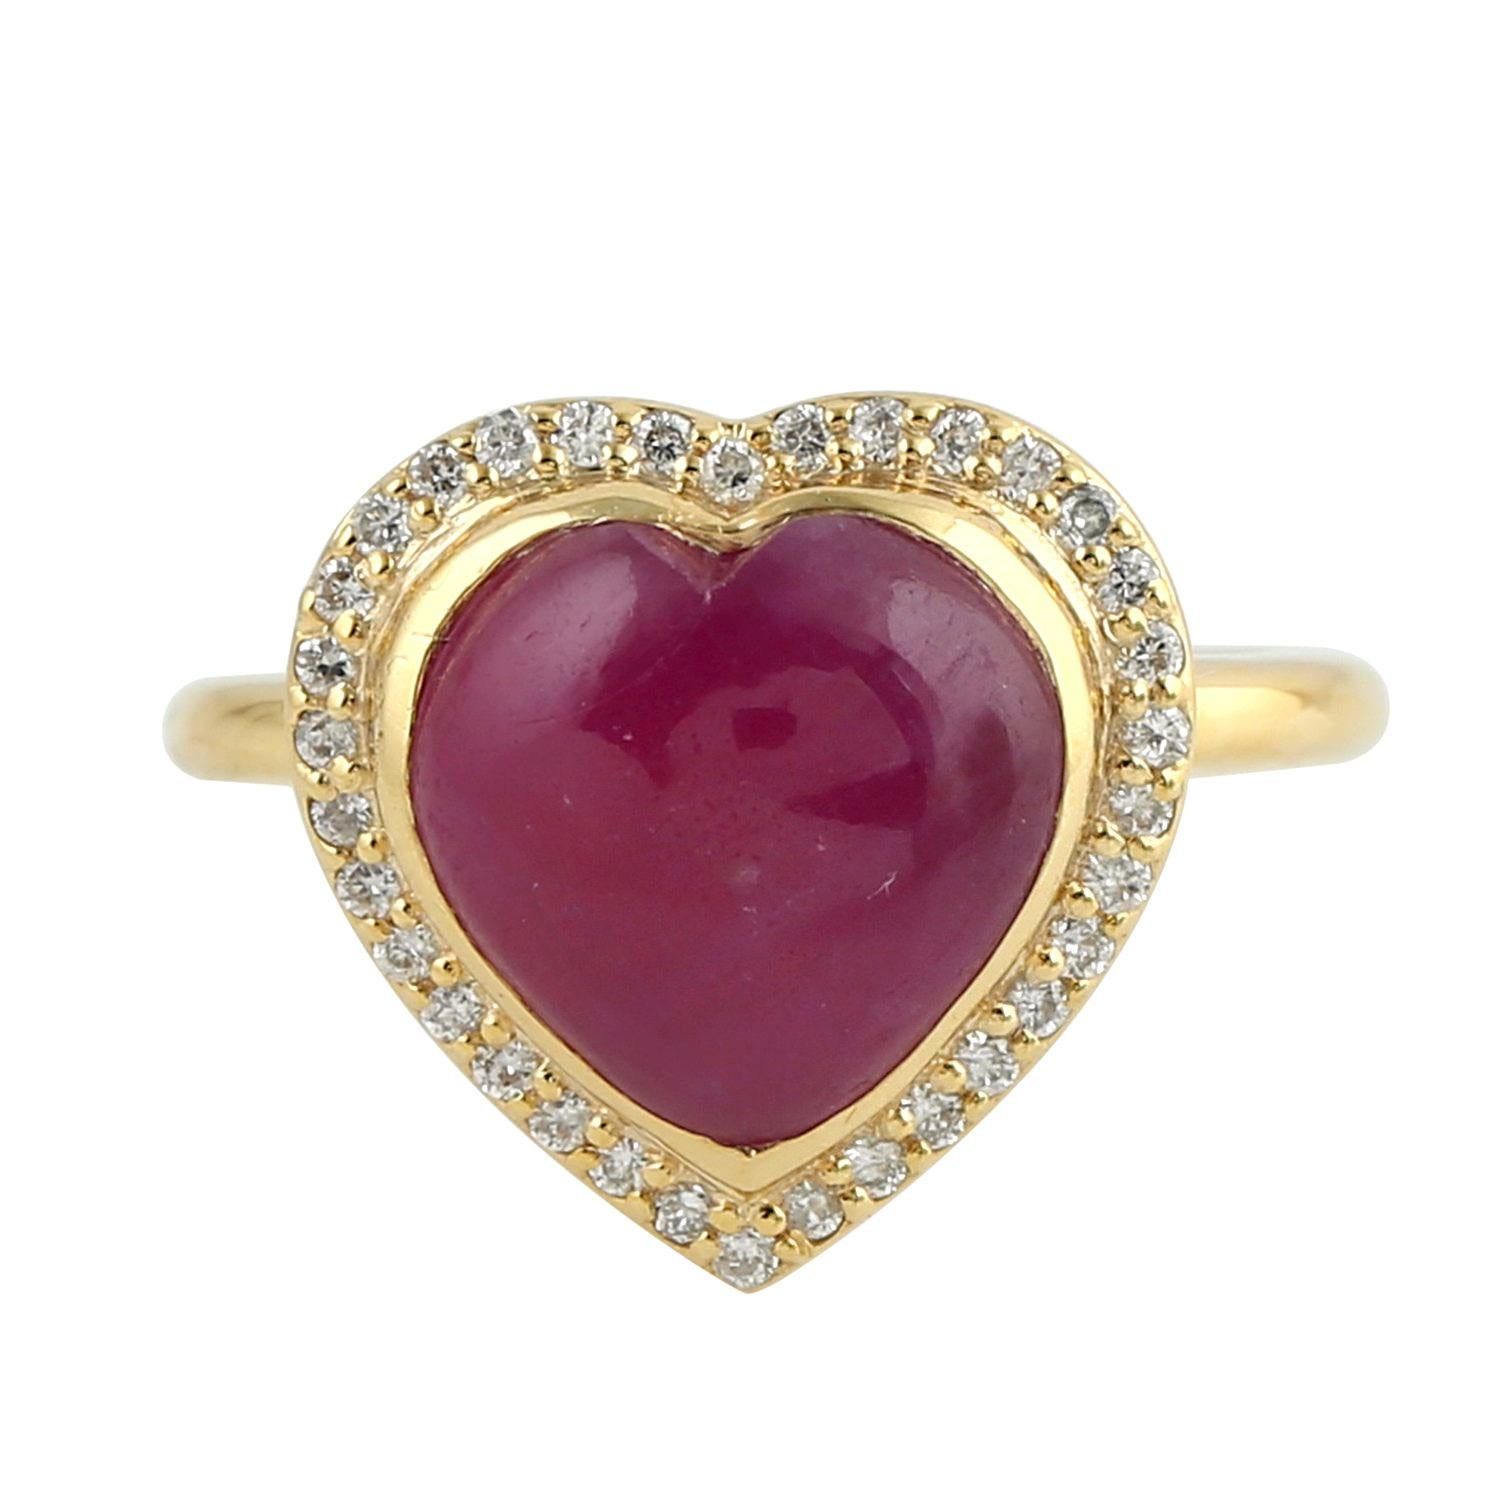 6.41 Ct Heart Shaped Pink Sapphire Cocktail Ring With Diamonds In 18k Gold In New Condition For Sale In New York, NY